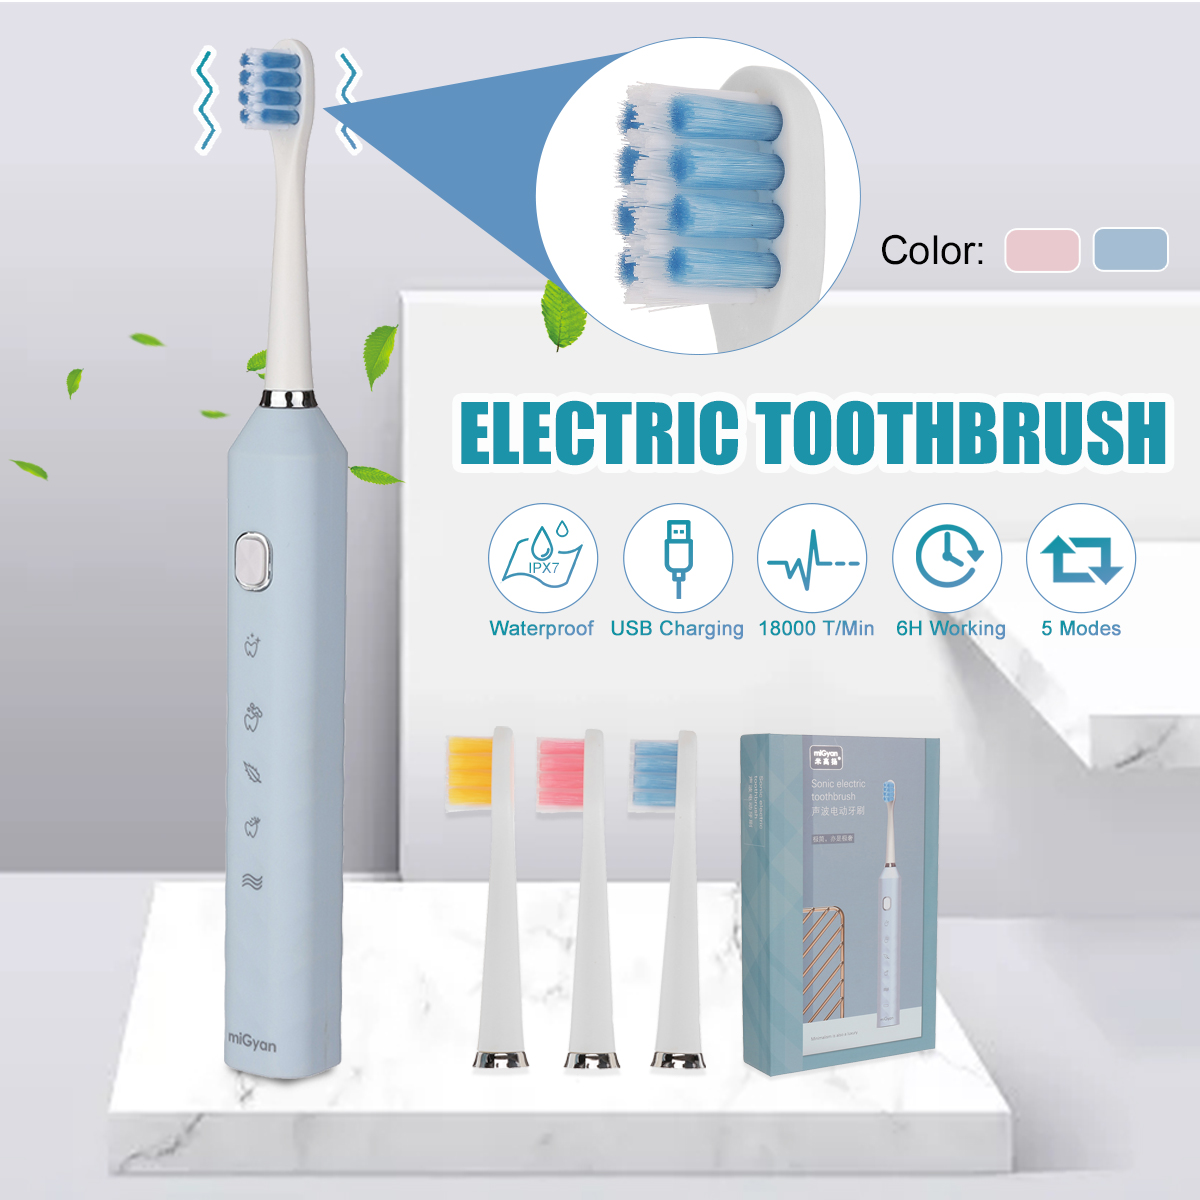 18000rpm-Electric-Toothbrush-5-Modes-Tooth-Cleaner-IPX7-Waterproof-For-Above-Over-12-Years-Old-1869980-1